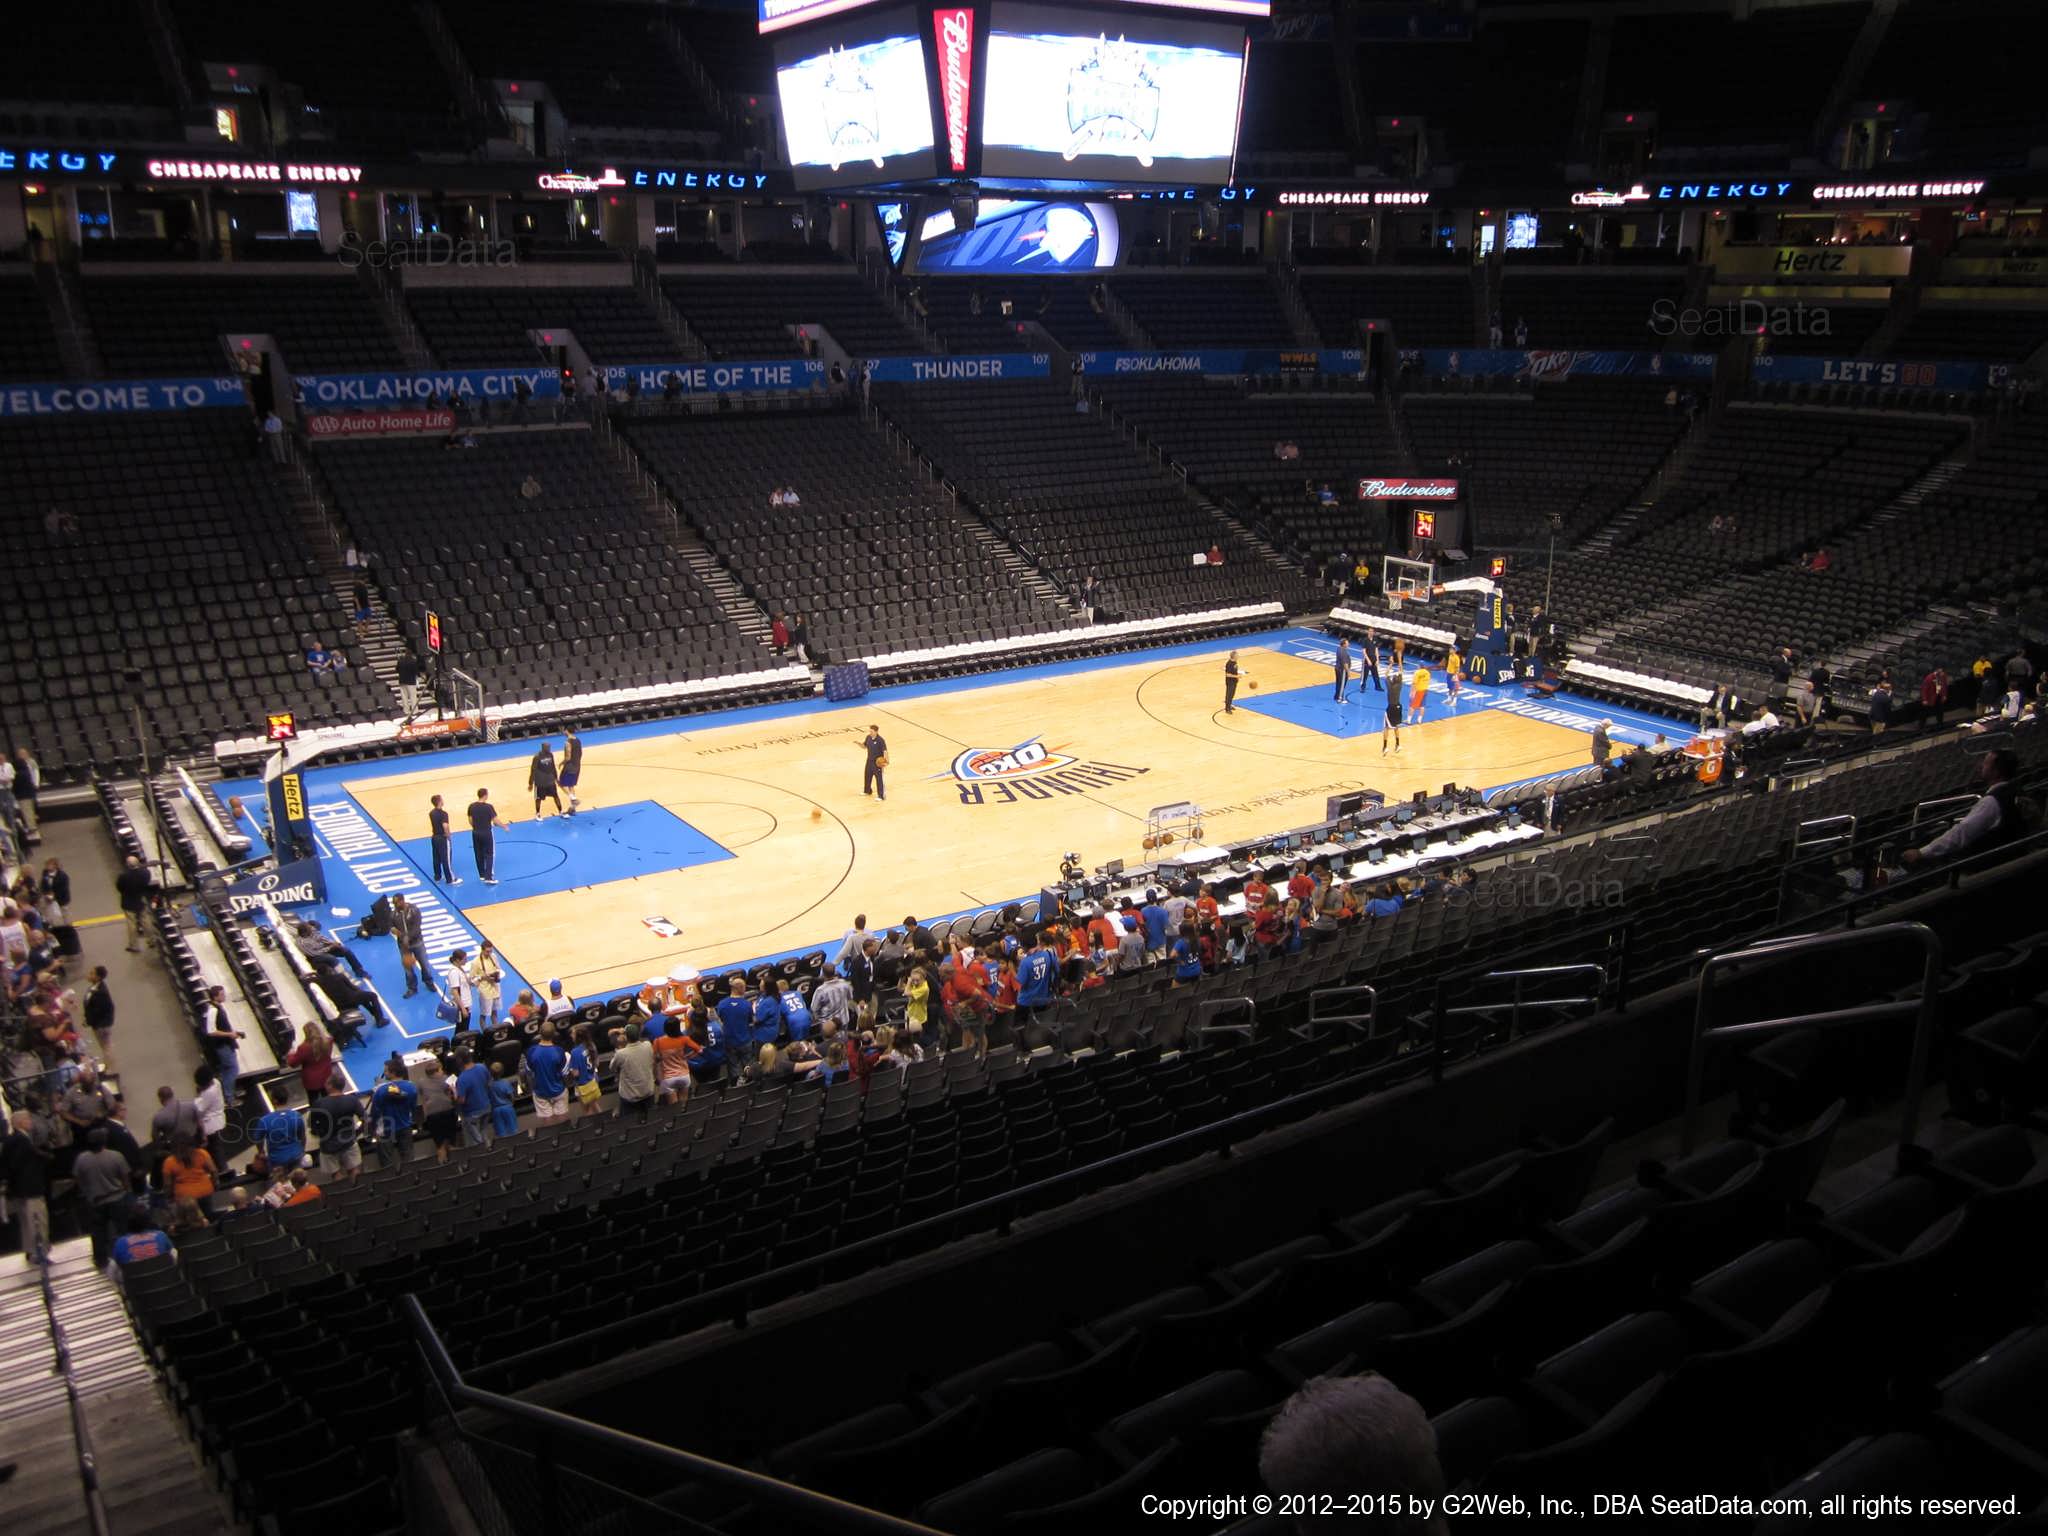 Seat view from section 225 at Chesapeake Energy Arena, home of the Oklahoma City Thunder